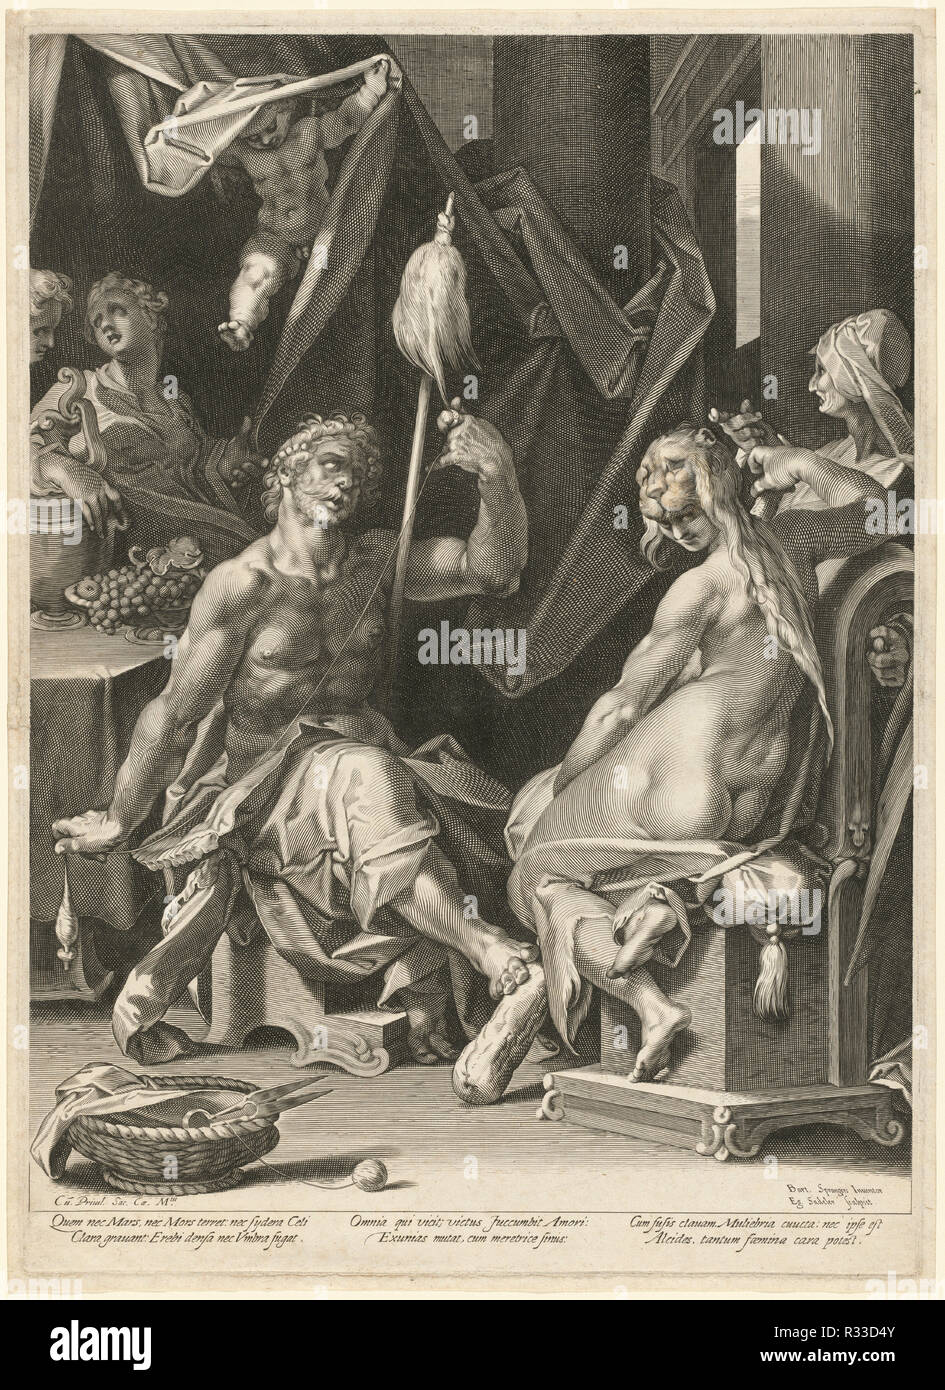 Hercules and Omphale. Dated: c. 1600. Dimensions: plate: 44.6 x 32 cm (17 9/16 x 12 5/8 in.)  sheet: 46.9 x 33.2 cm (18 7/16 x 13 1/16 in.). Medium: engraving on laid paper. Museum: National Gallery of Art, Washington DC. Author: Aegidius Sadeler II, after Bartholomaeus Spranger. After Bartholomeus Spranger. Aegidius Sadeler II. Stock Photo